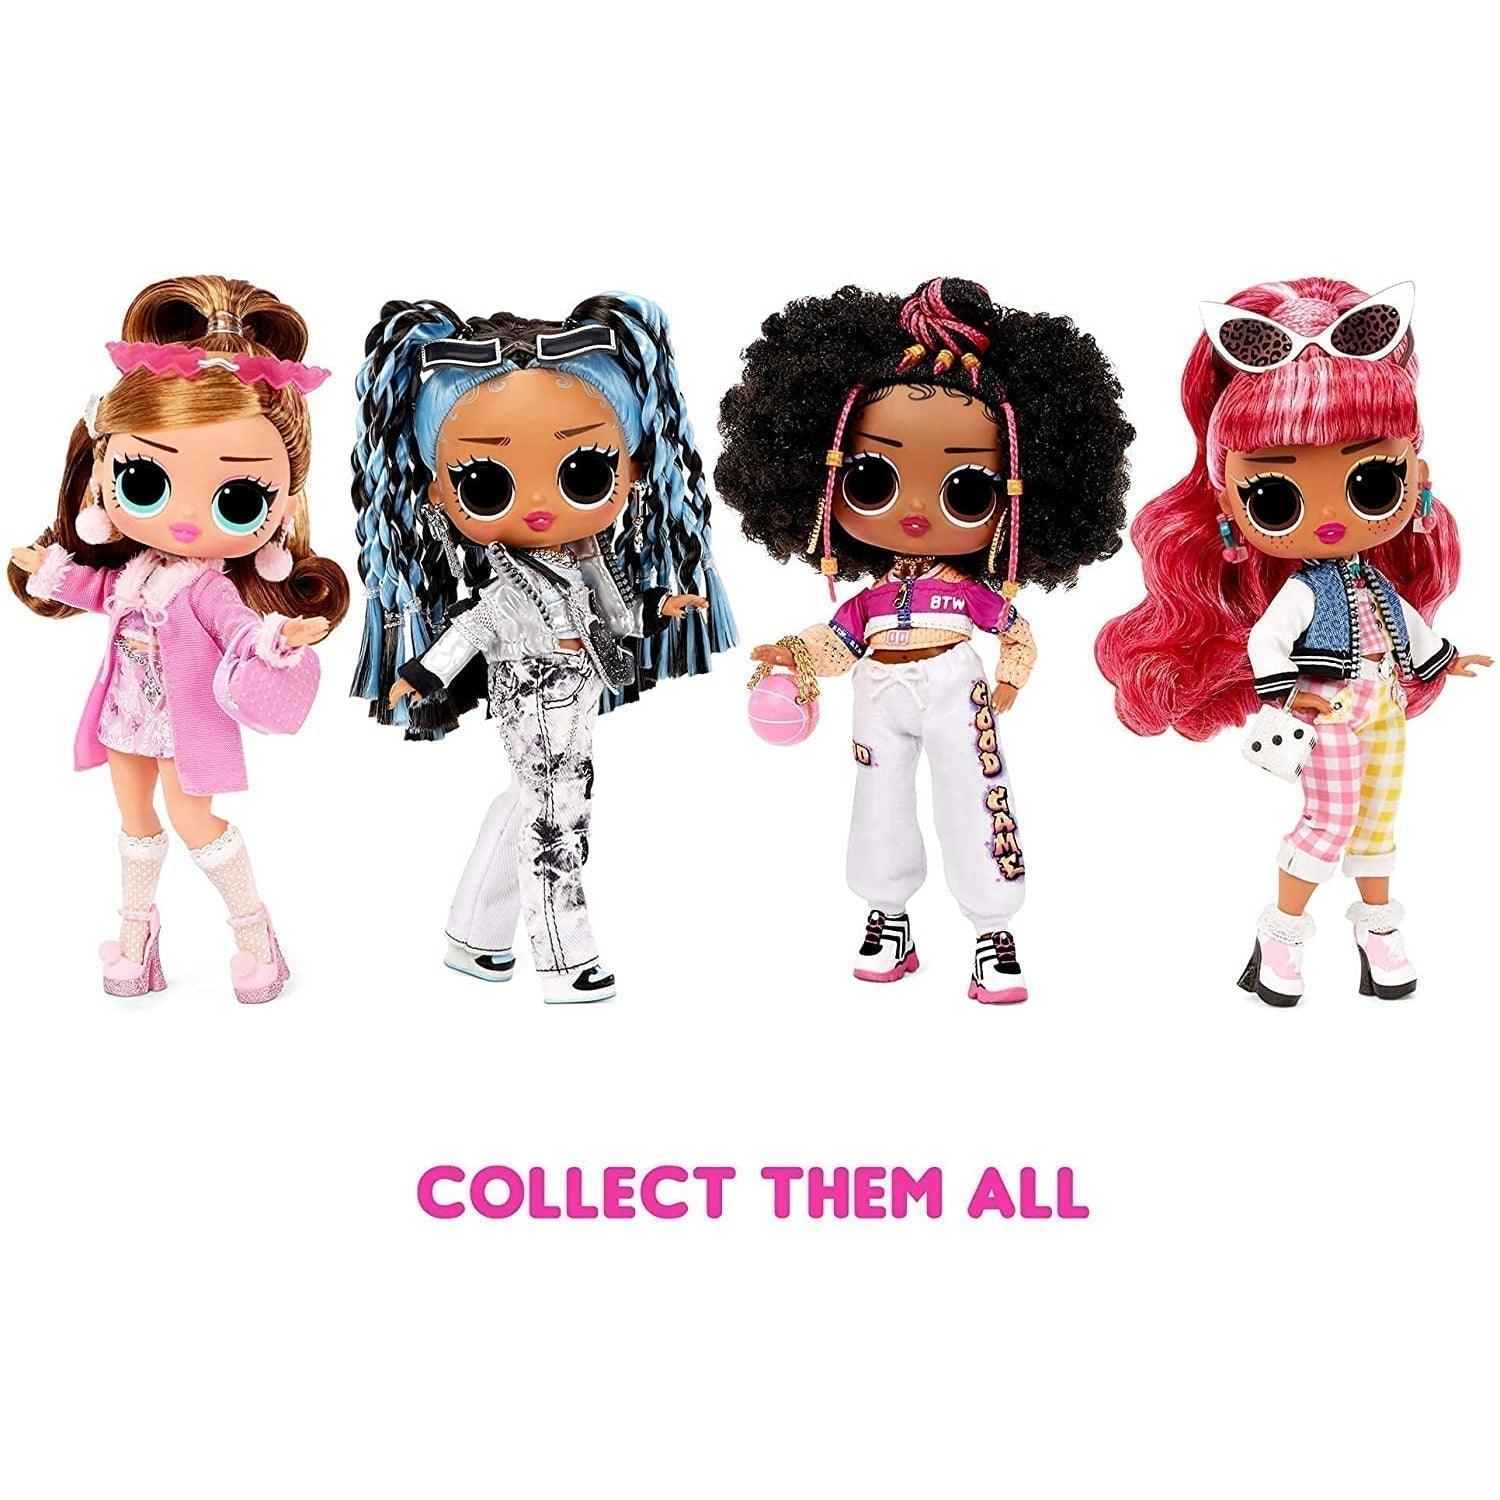 LOL Surprise Tweens Fashion Doll Hoops Cutie with 15 Surprises Including Outfit and Accessories for Fashion Toy - BumbleToys - 2-4 Years, Dolls, Dress Up Accessories, Fashion Dolls & Accessories, Girls, L.O.L, OXE, Pre-Order